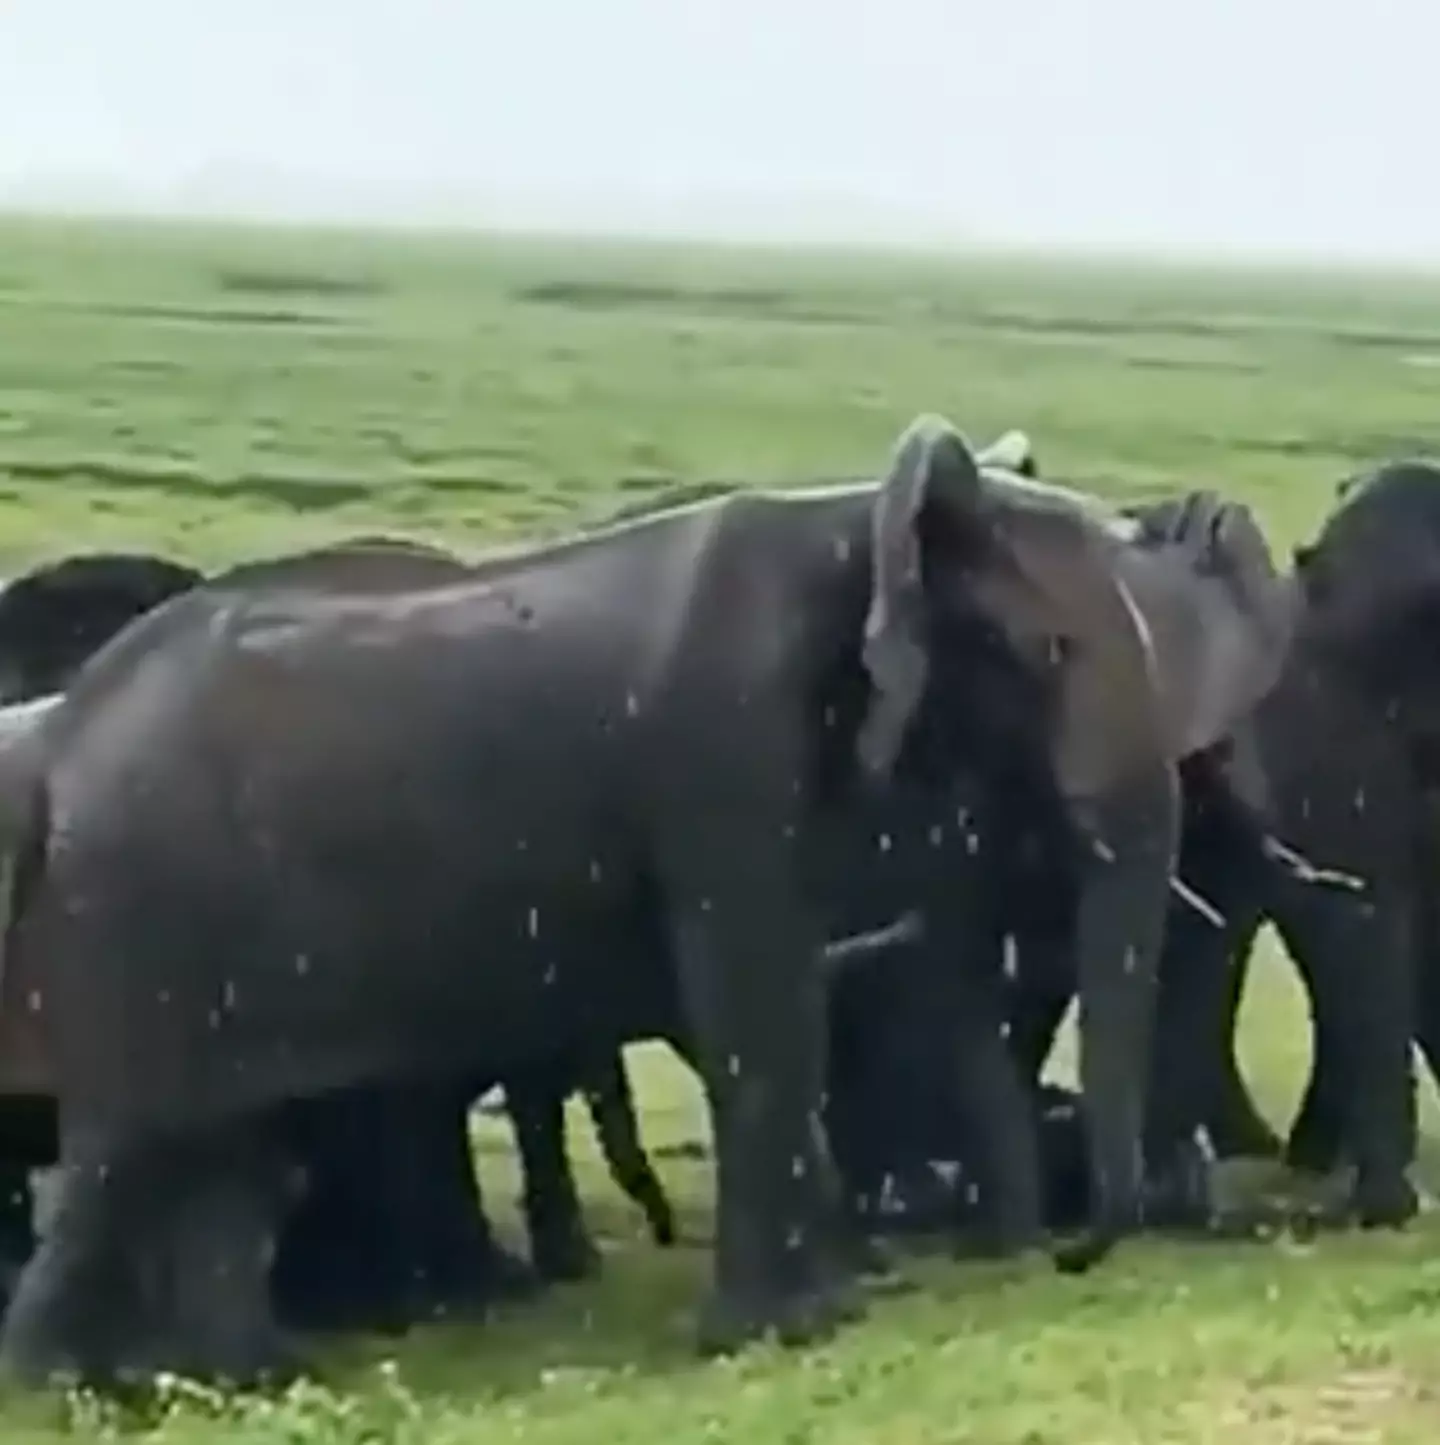 As the mother elephant gives birth to the baby, she is surrounded by a herd of other elephants to protect the little one.